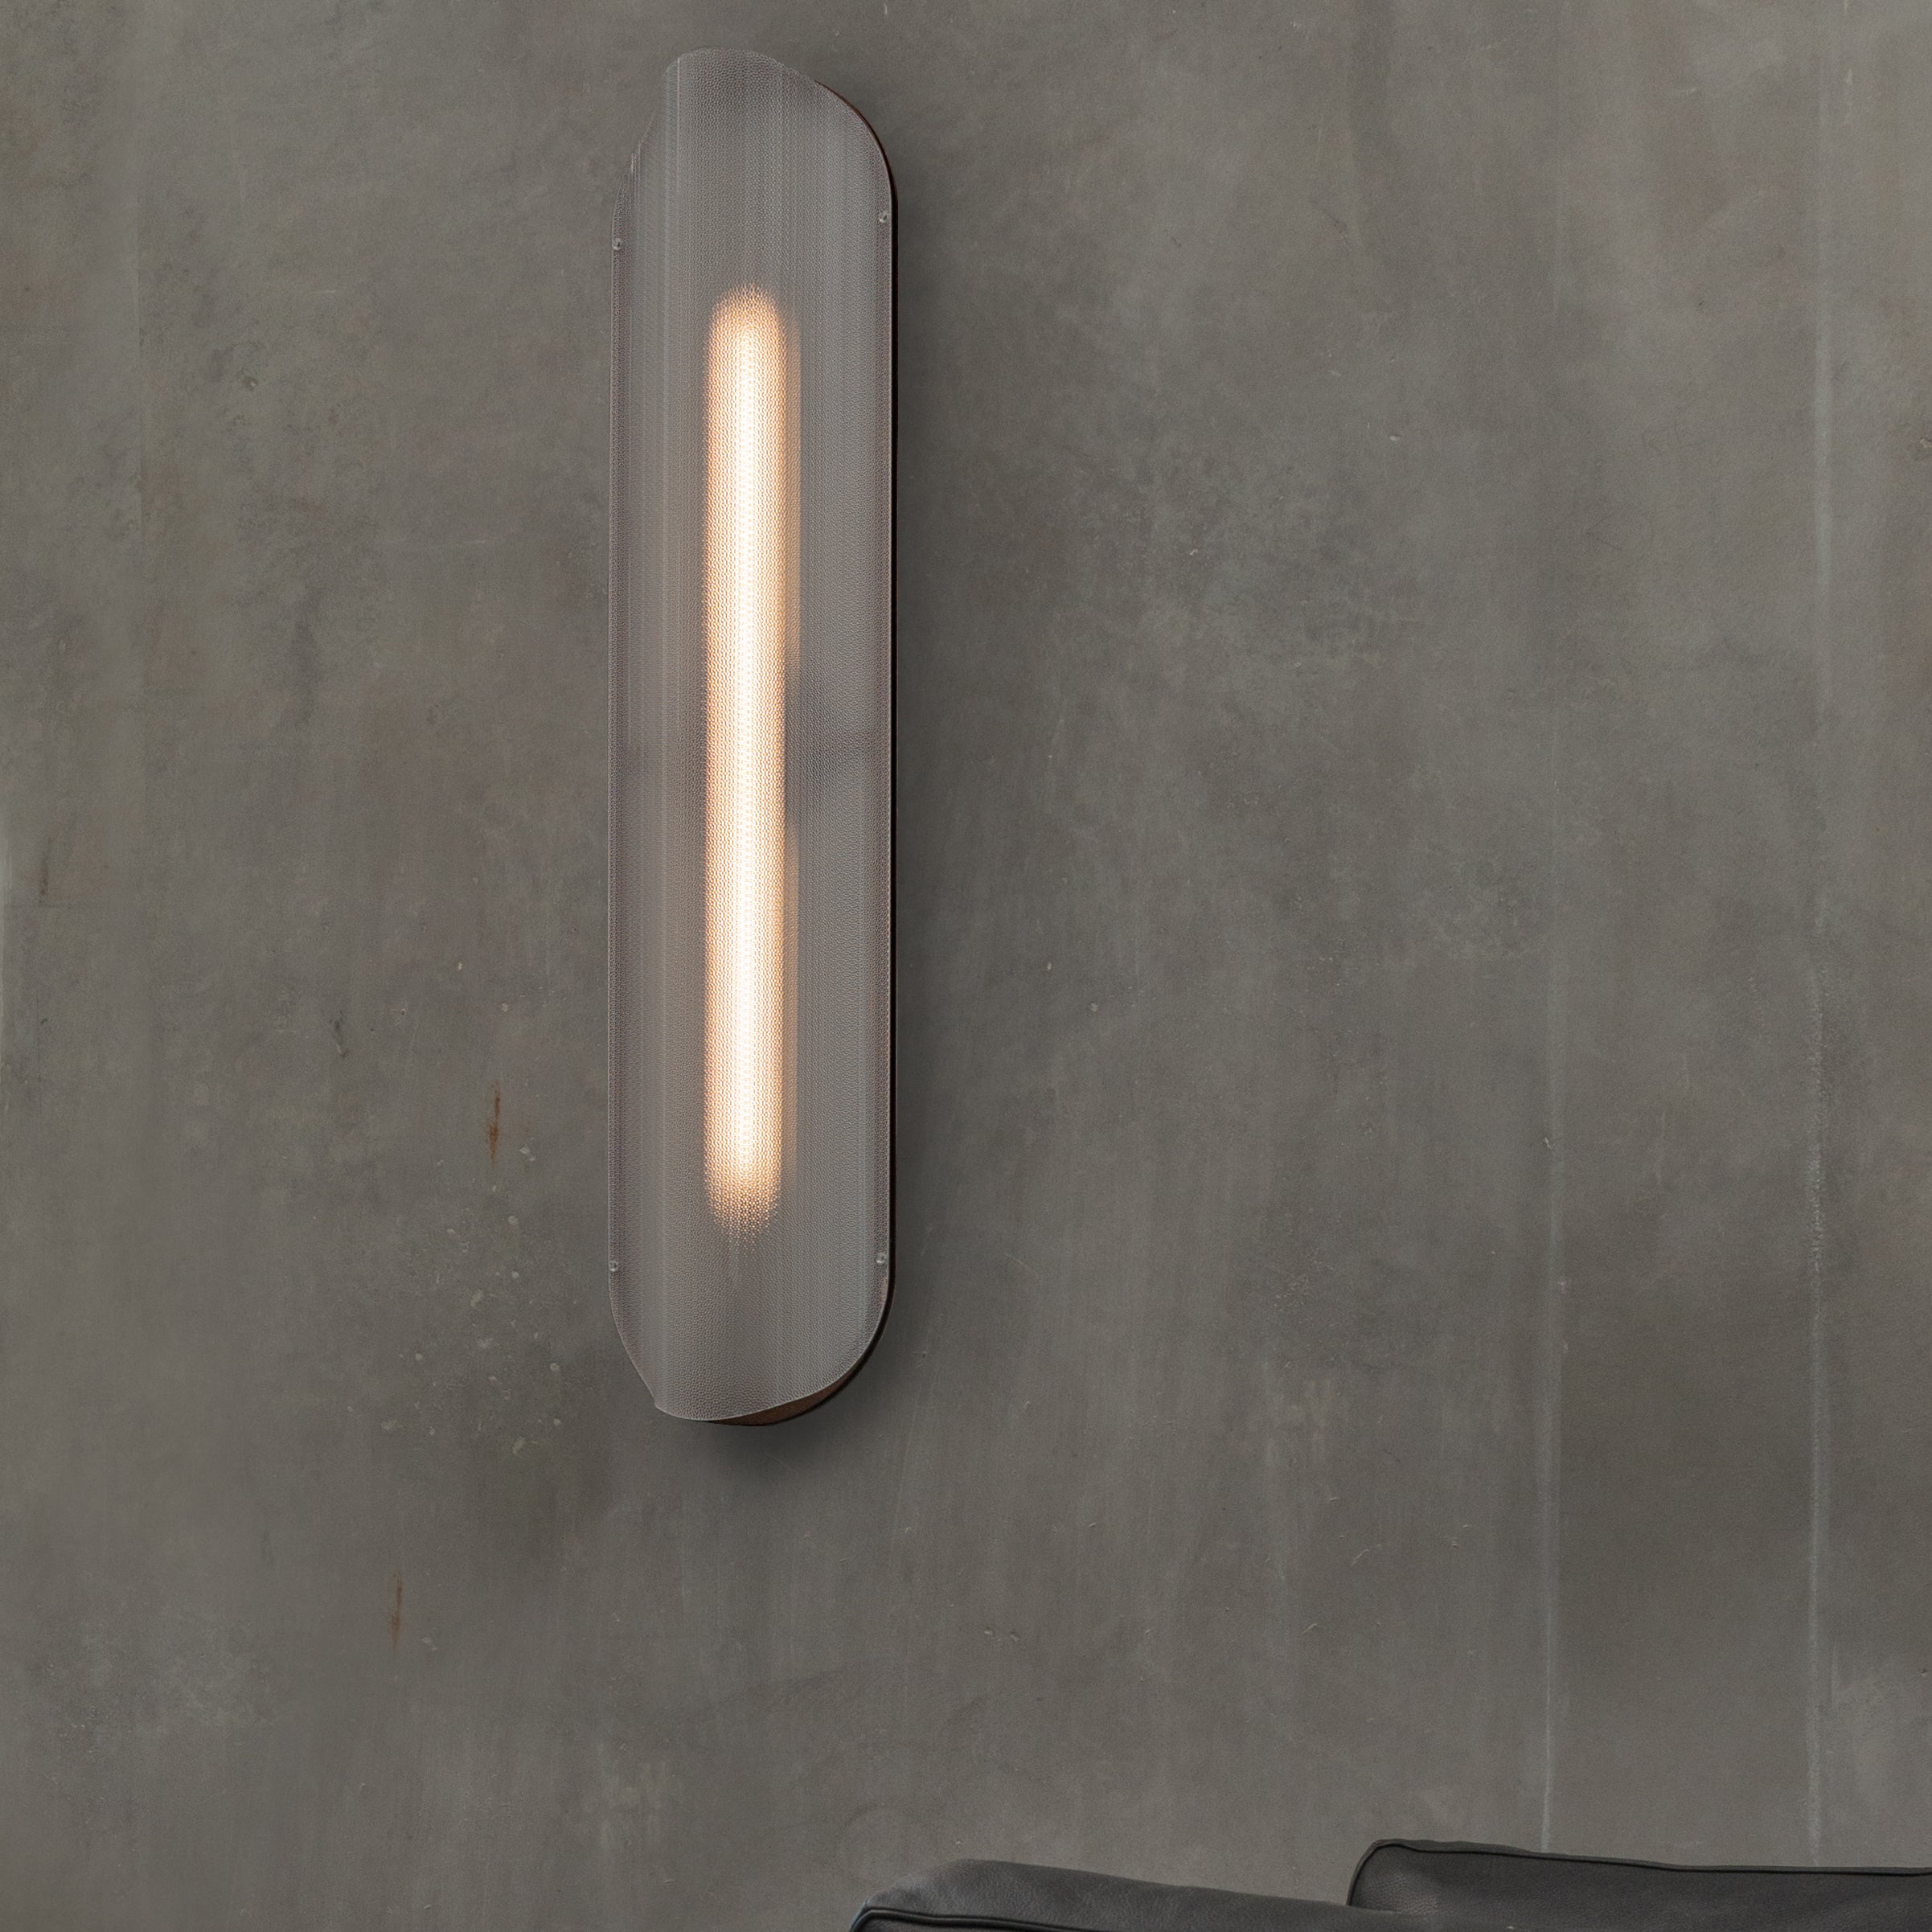 Vale System Ceiling/Wall Light: Vertical + End-to-End